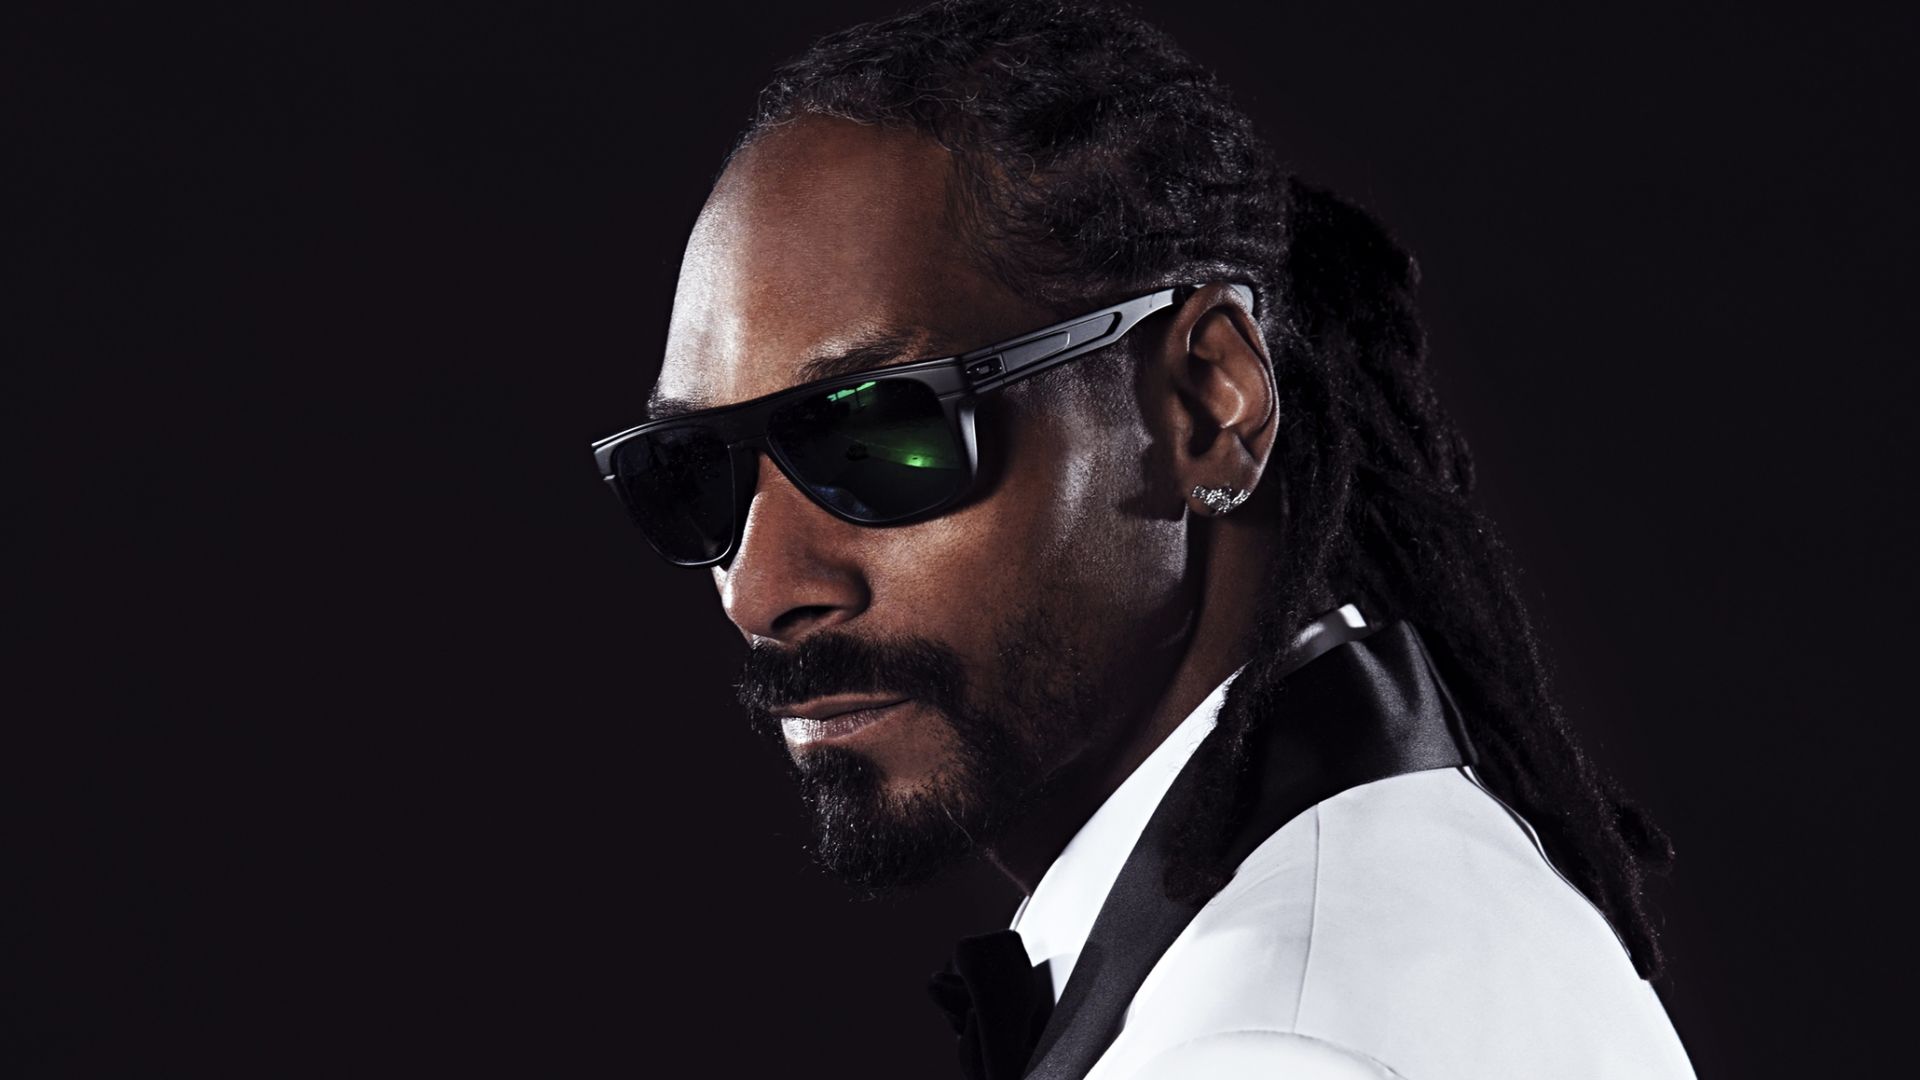 20 Snoop Dogg HD Wallpapers and Backgrounds